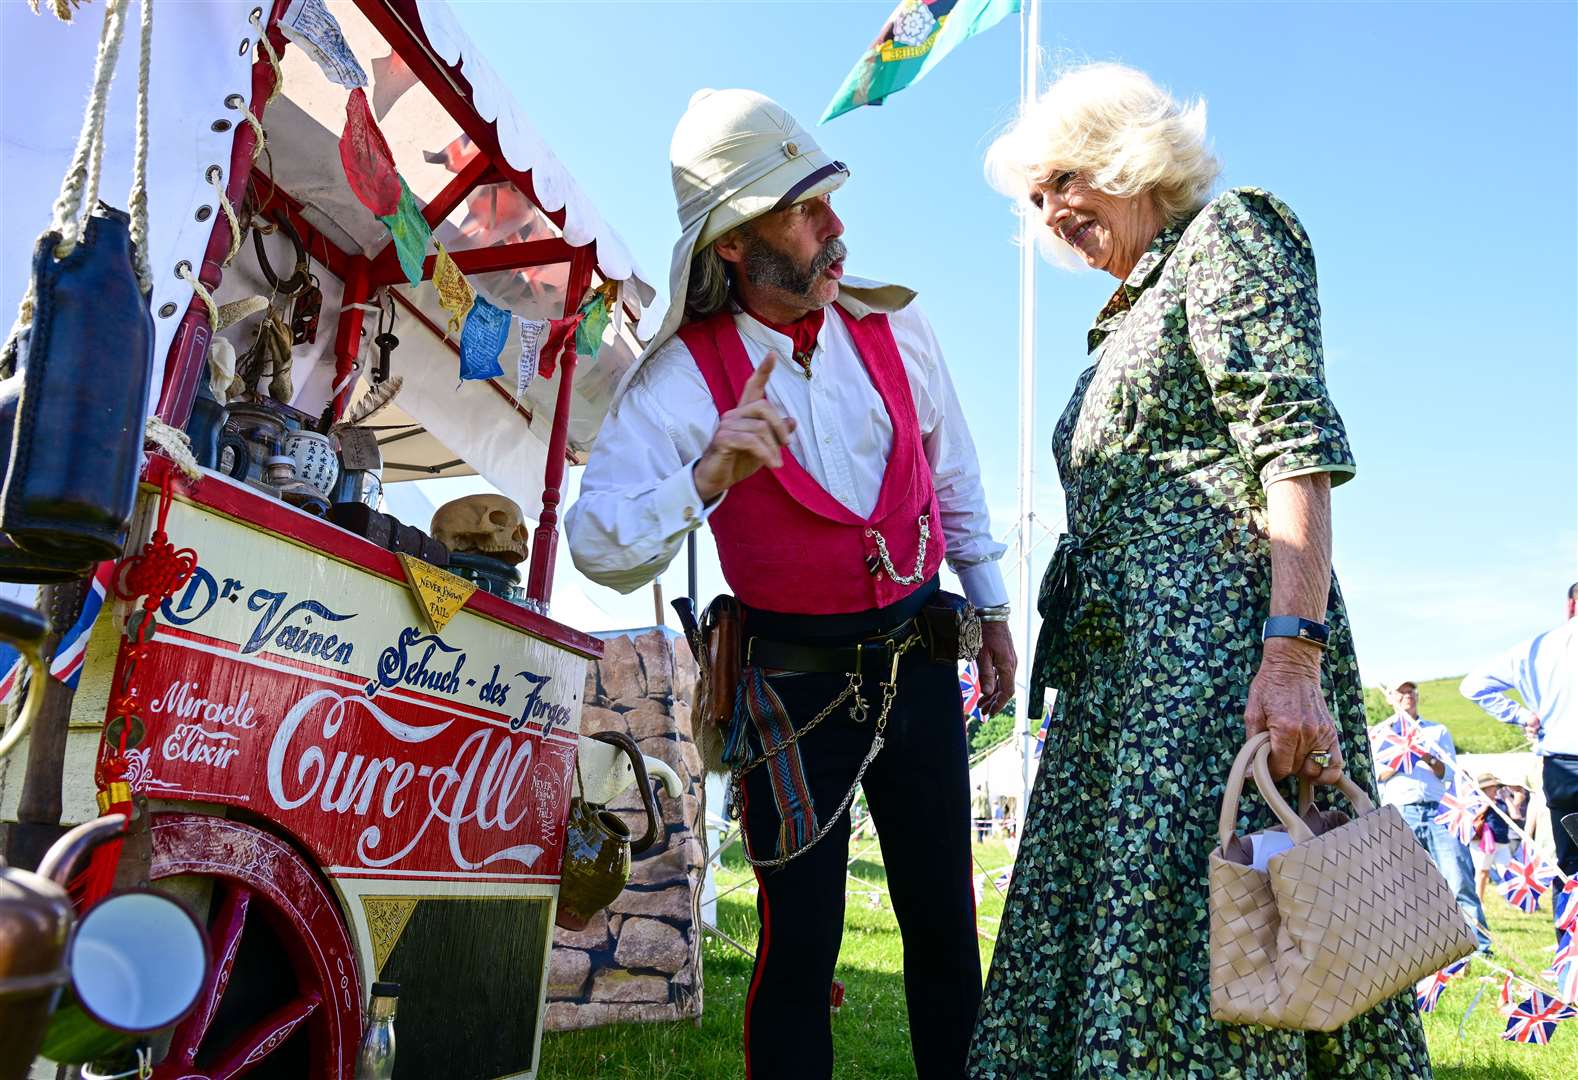 The Duchess of Cornwall meets a re-enactor during a tour of the festival (Finnbarr Webster/PA)